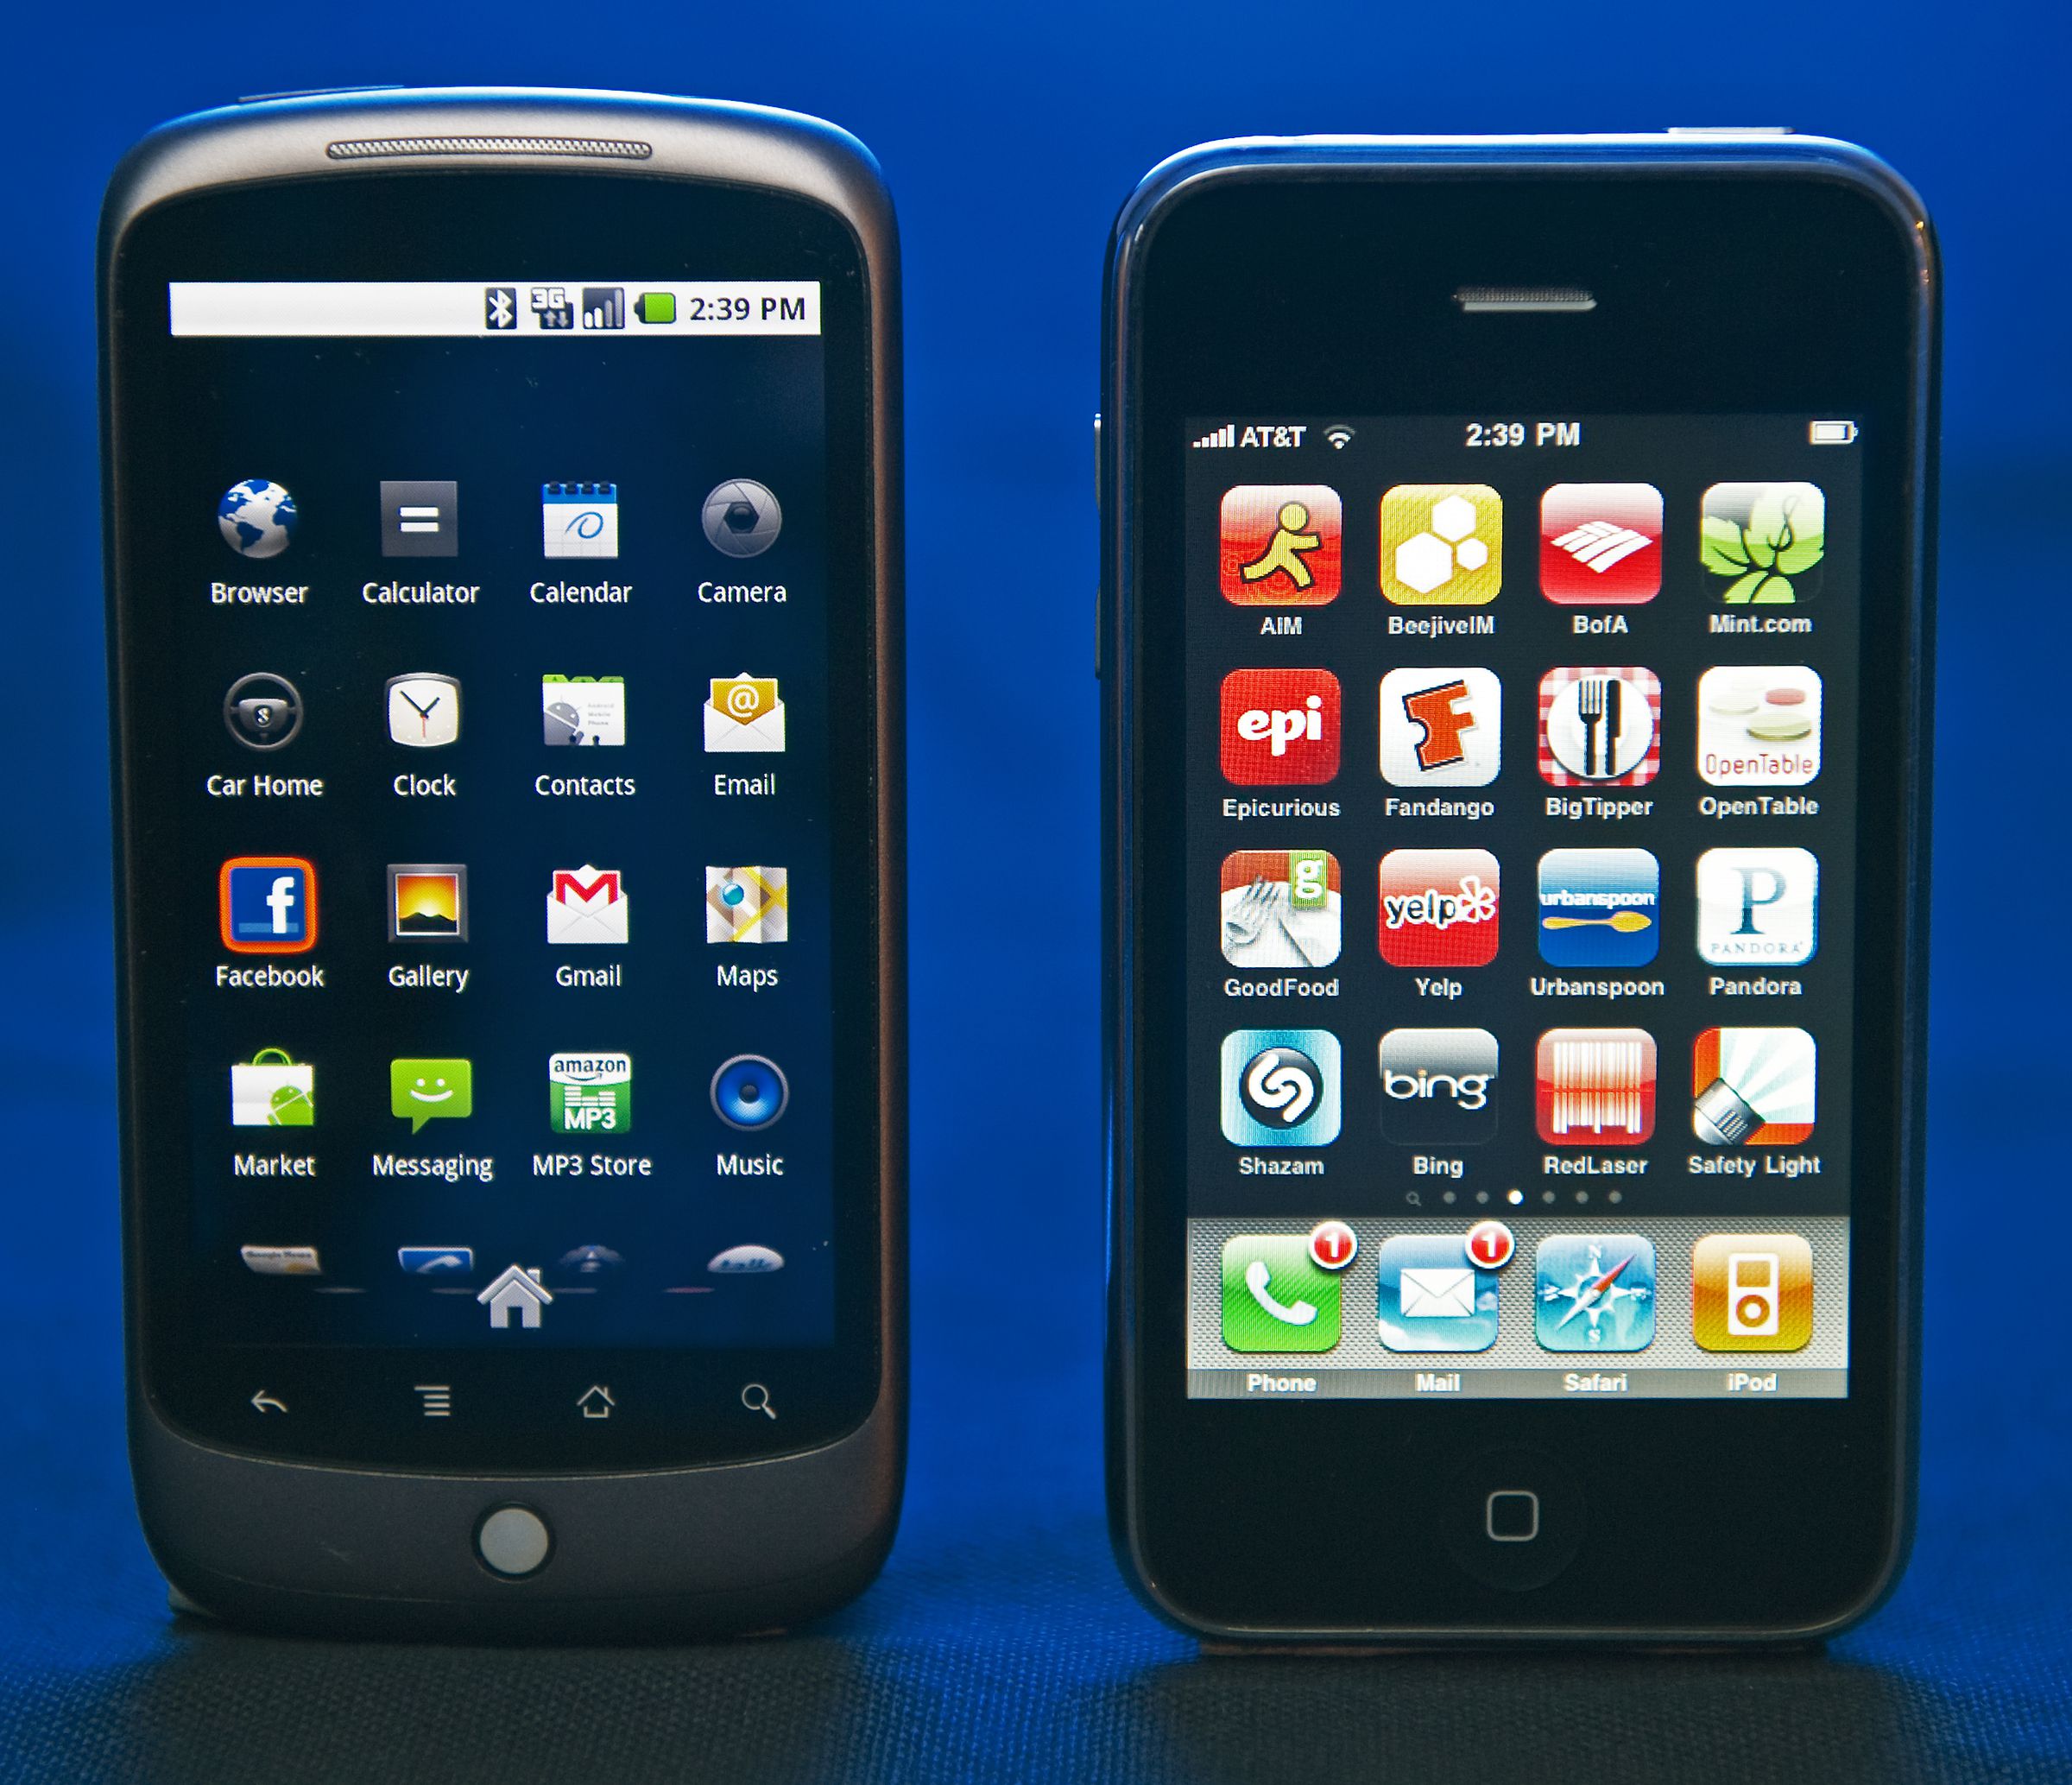 The Google Nexus One(L) smartphone with iPhone